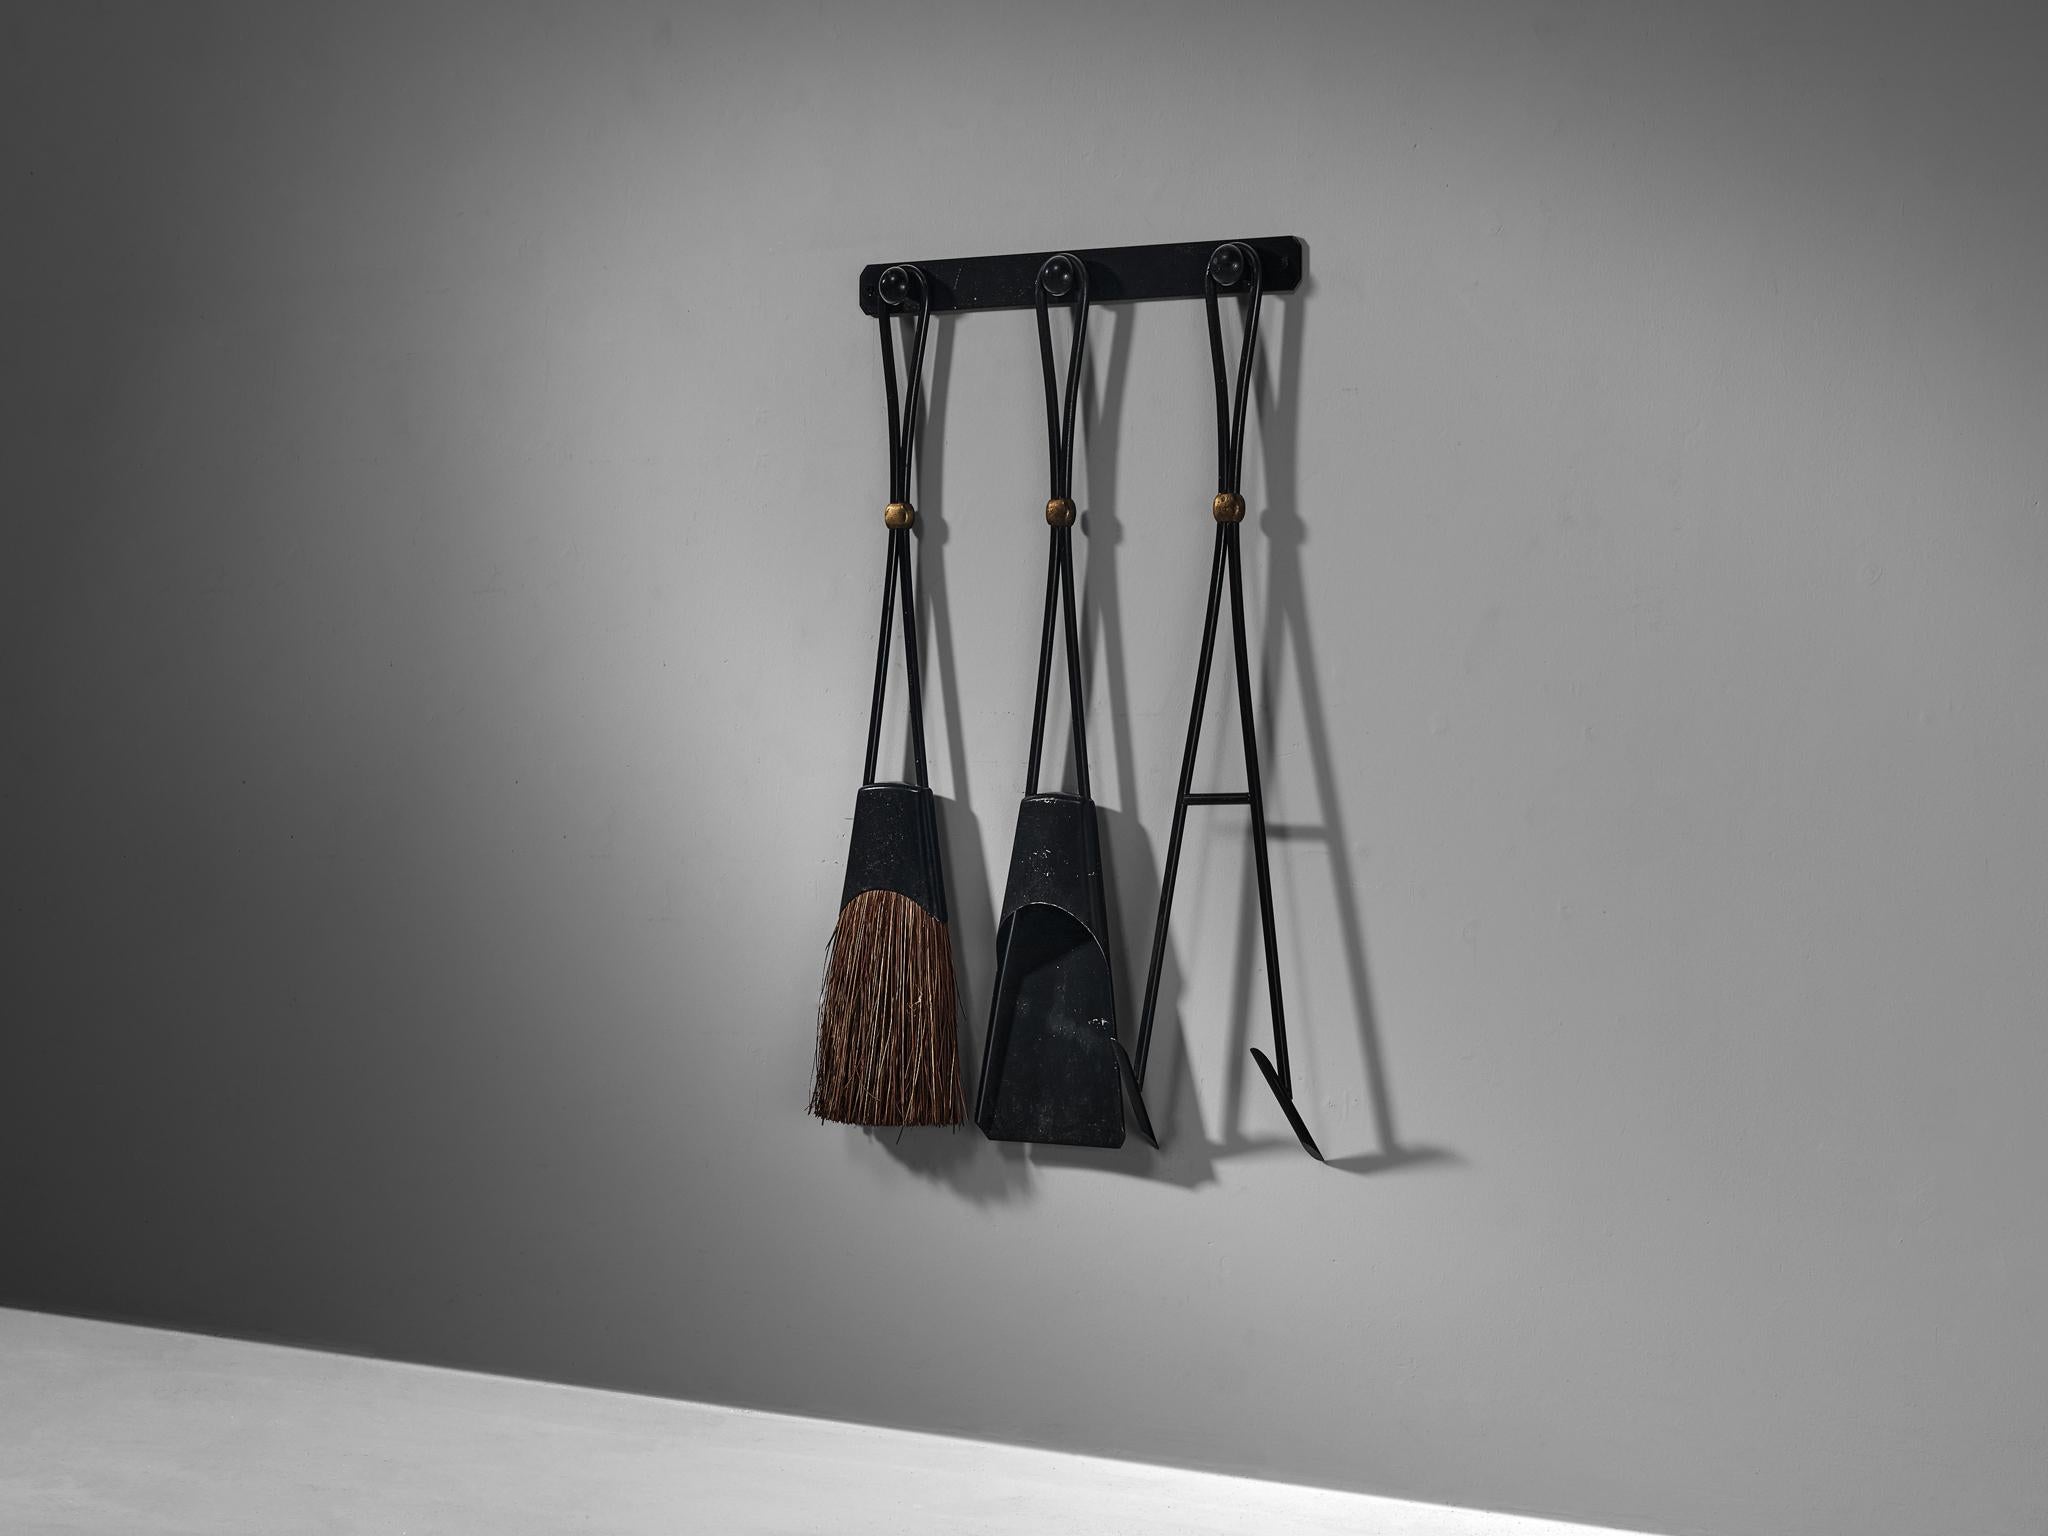 Jens Harald Quistgaard, fireplace set, model '1400', forged iron, brass, straw, Denmark, circa 1965.

Danish sculptor and designer Jens Harald Quistgaard (1919-2008) is particularly known for designing kitchenware and tableware. Although consisting